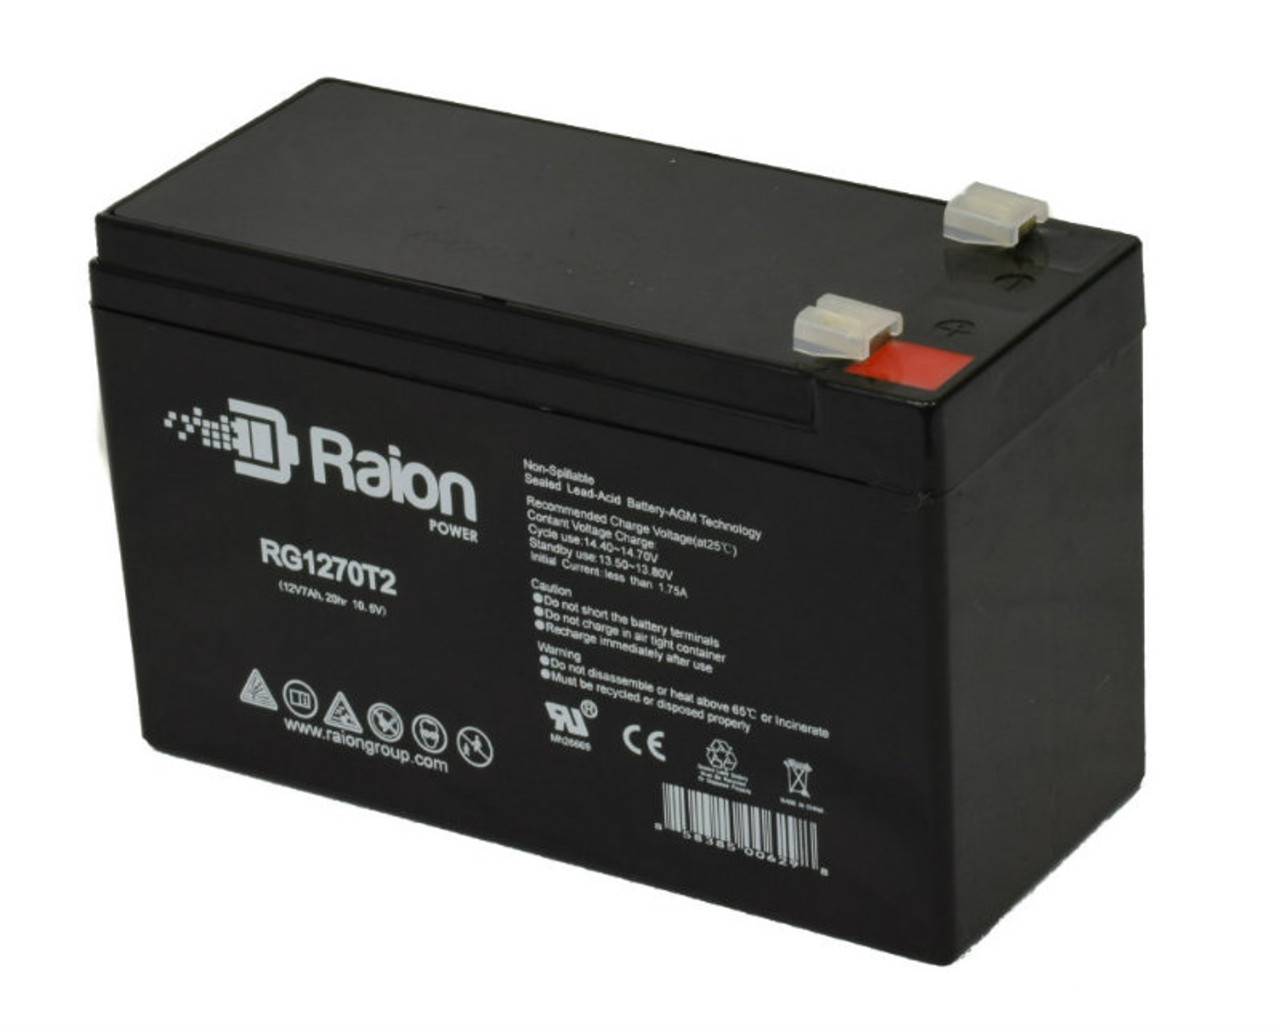 Raion Power RG1270T1 12V 7Ah Non-Spillable Replacement Battery for NPP Power NP12-7Ah